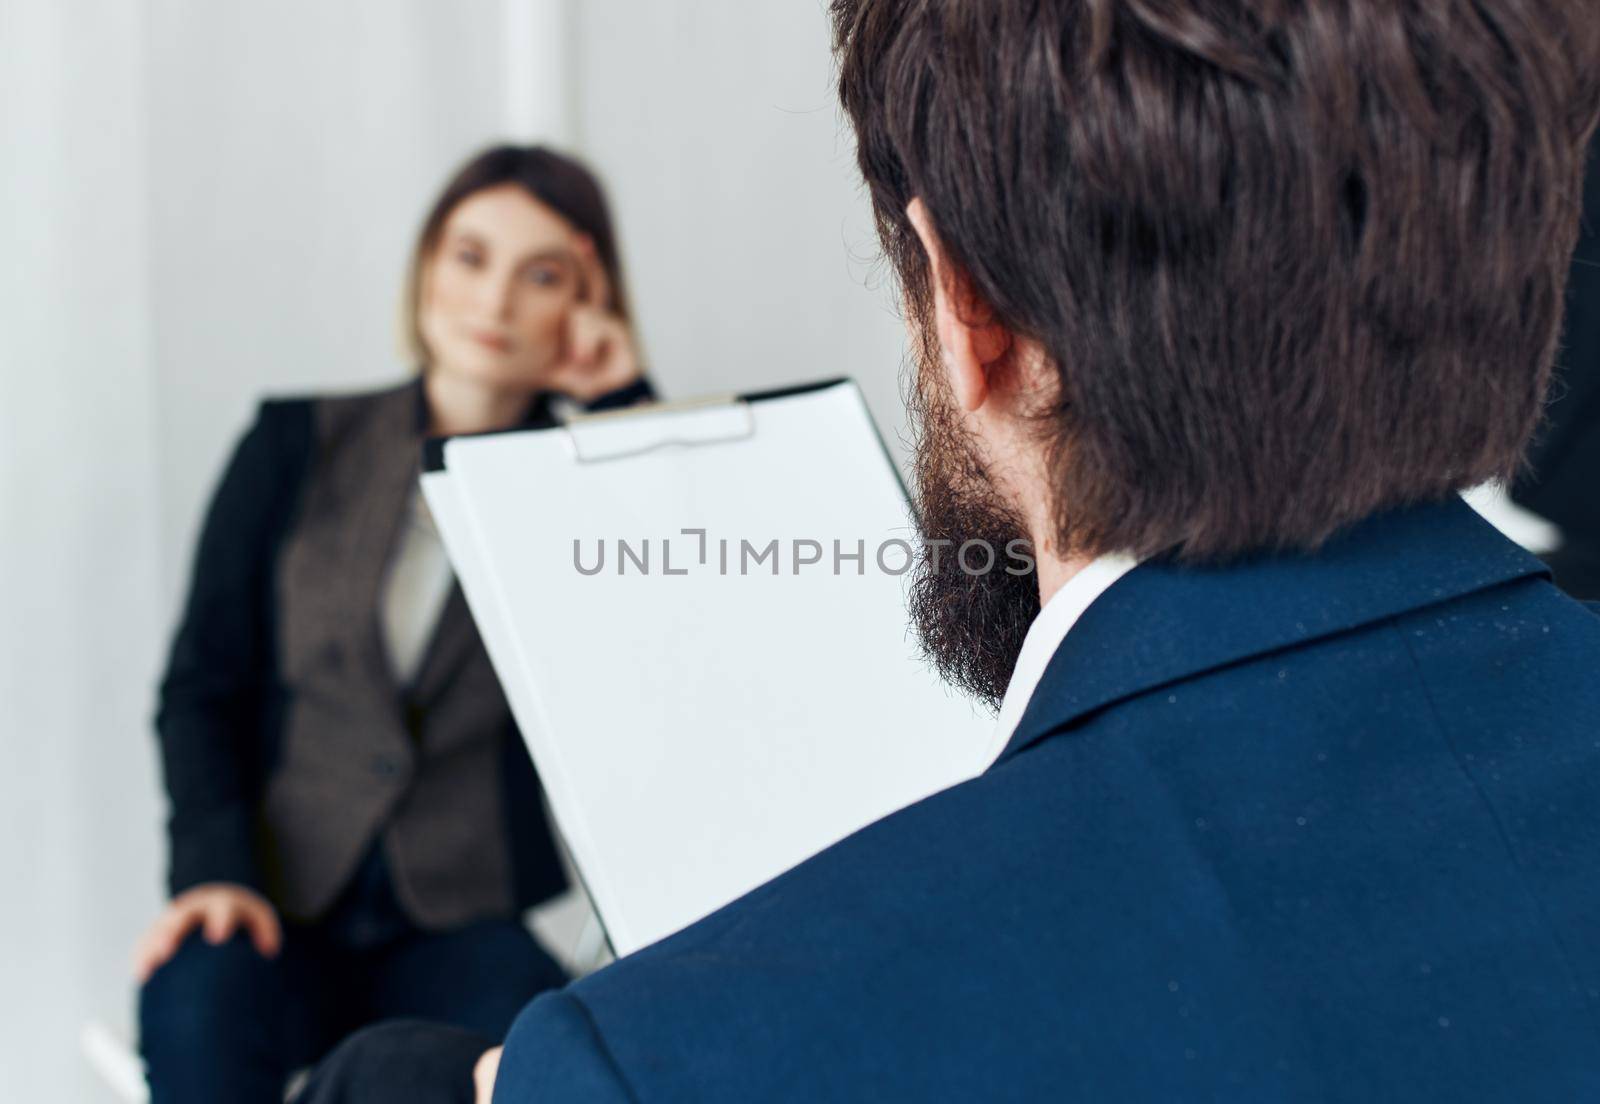 Business man communicates with a woman in a suit, staff vacancies resume by SHOTPRIME